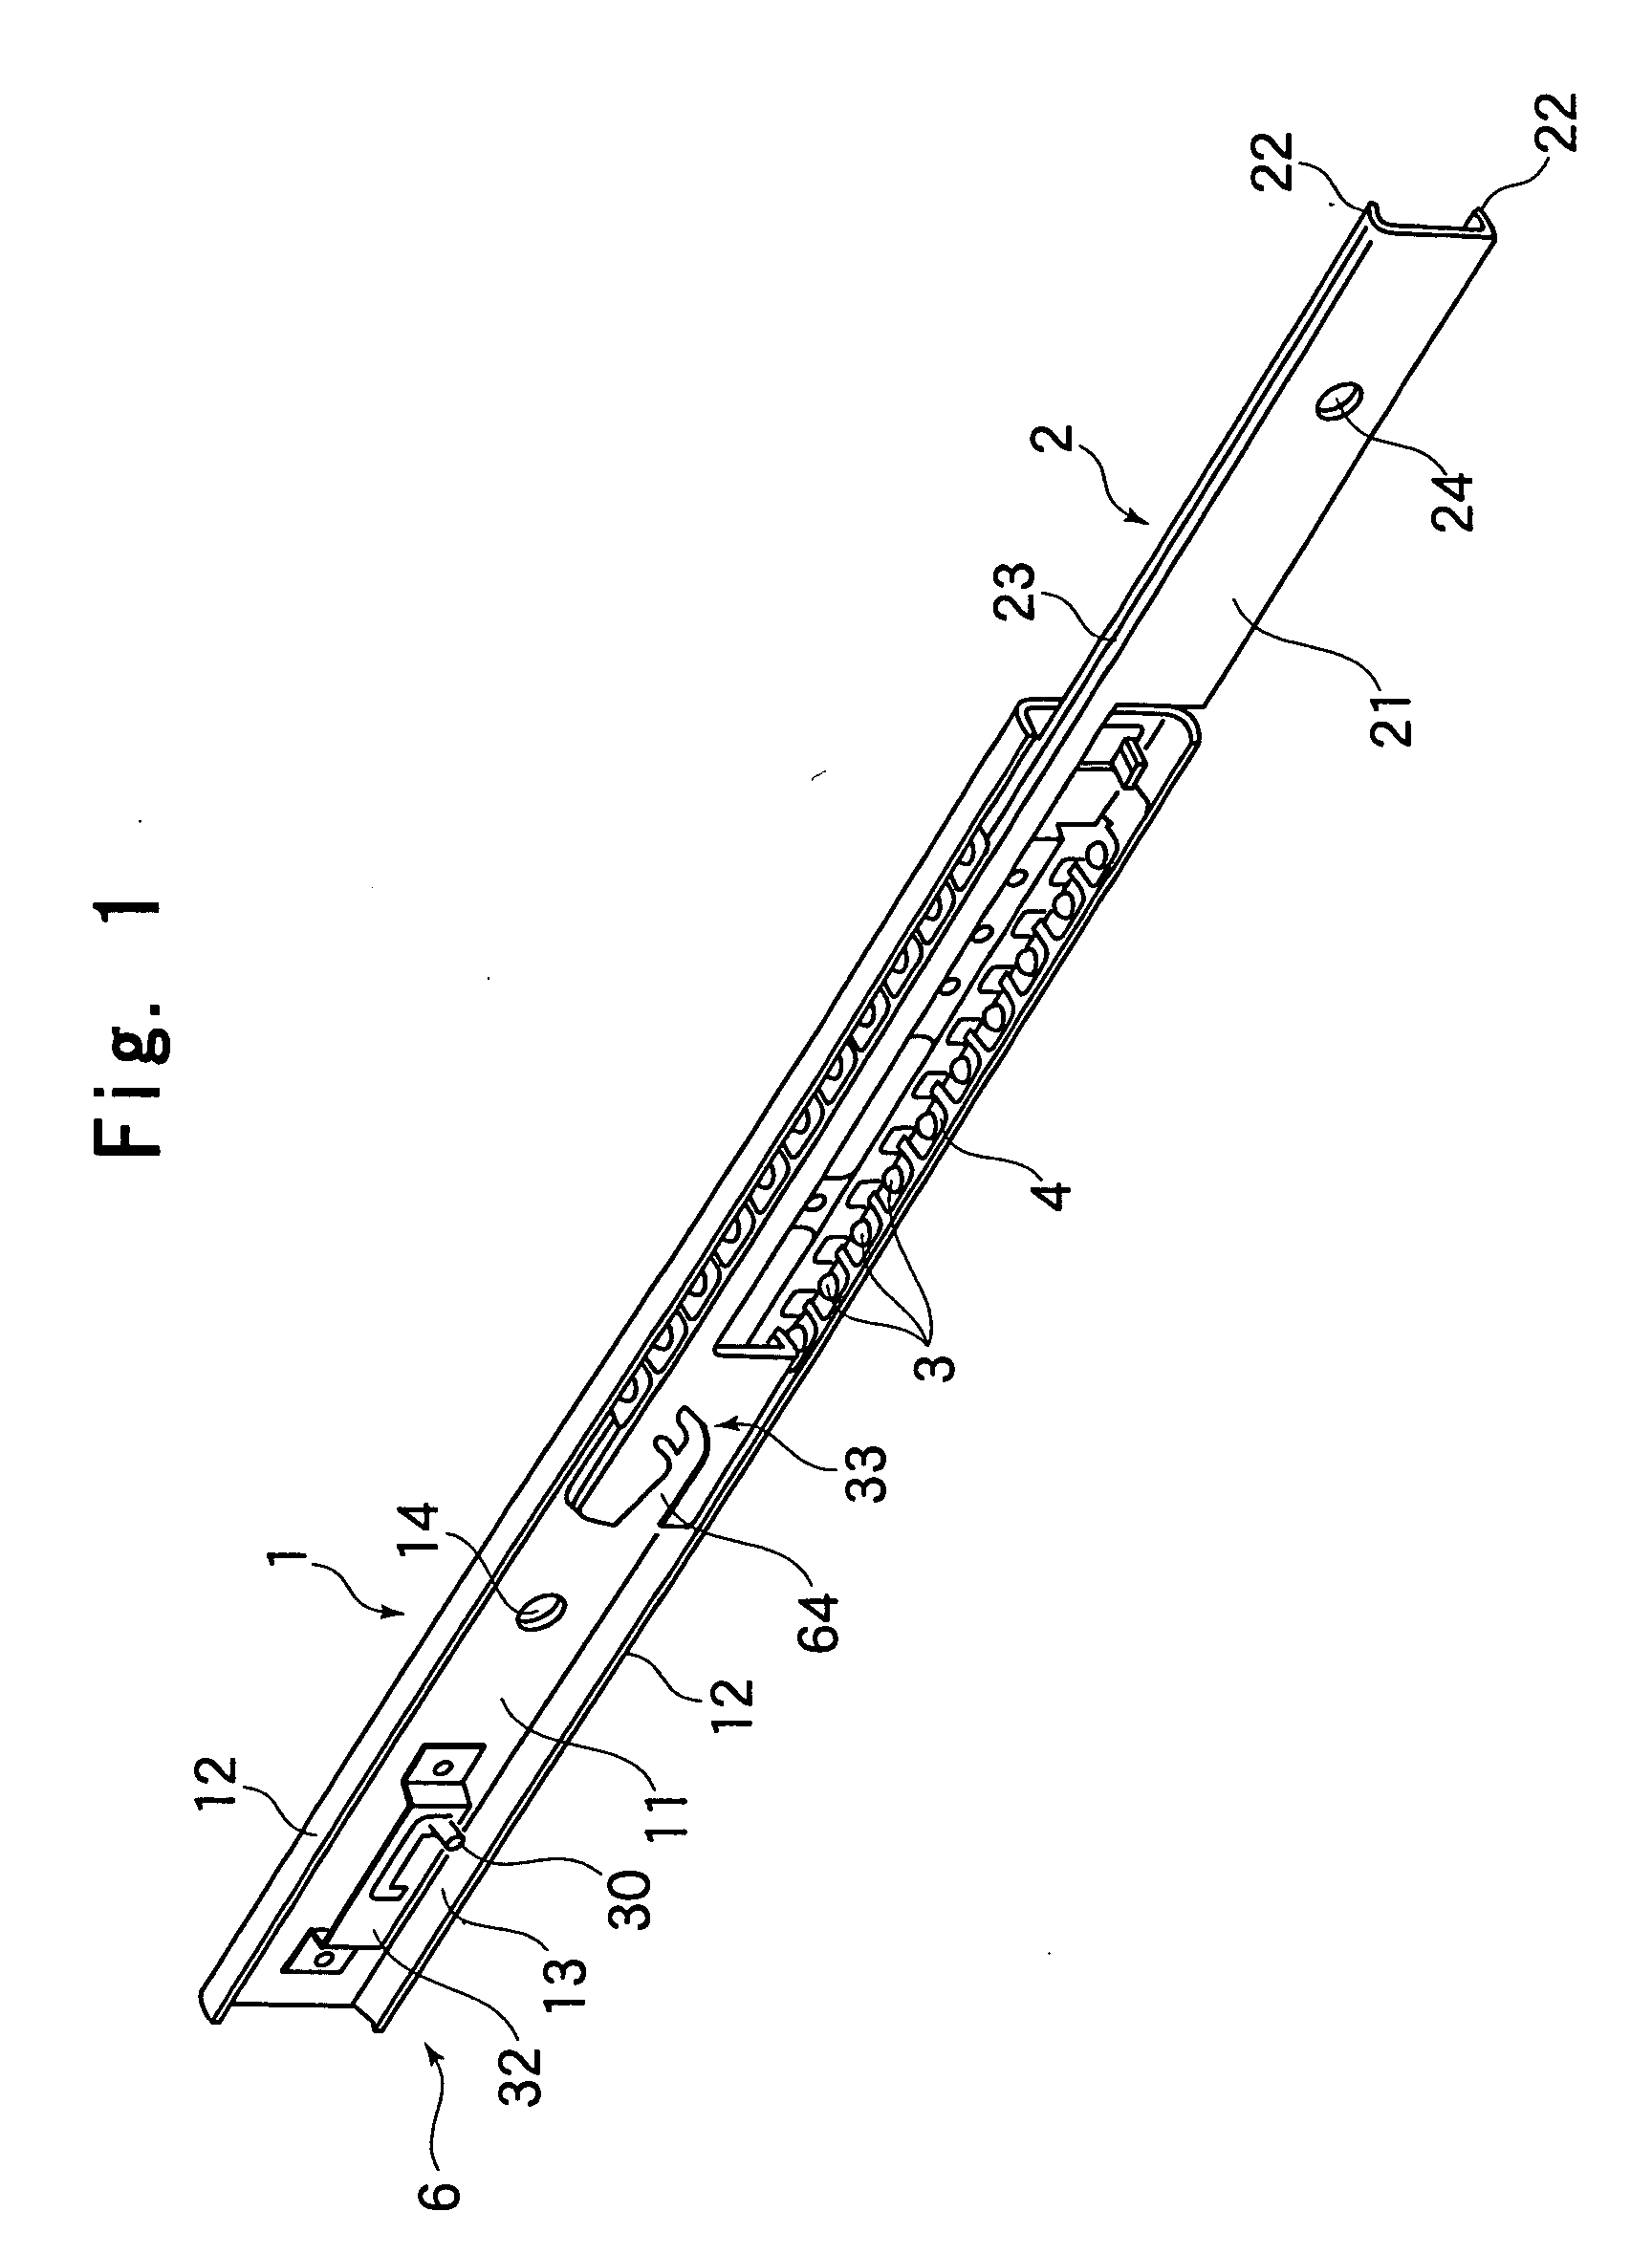 Slide Rail Unit With Retaining Function